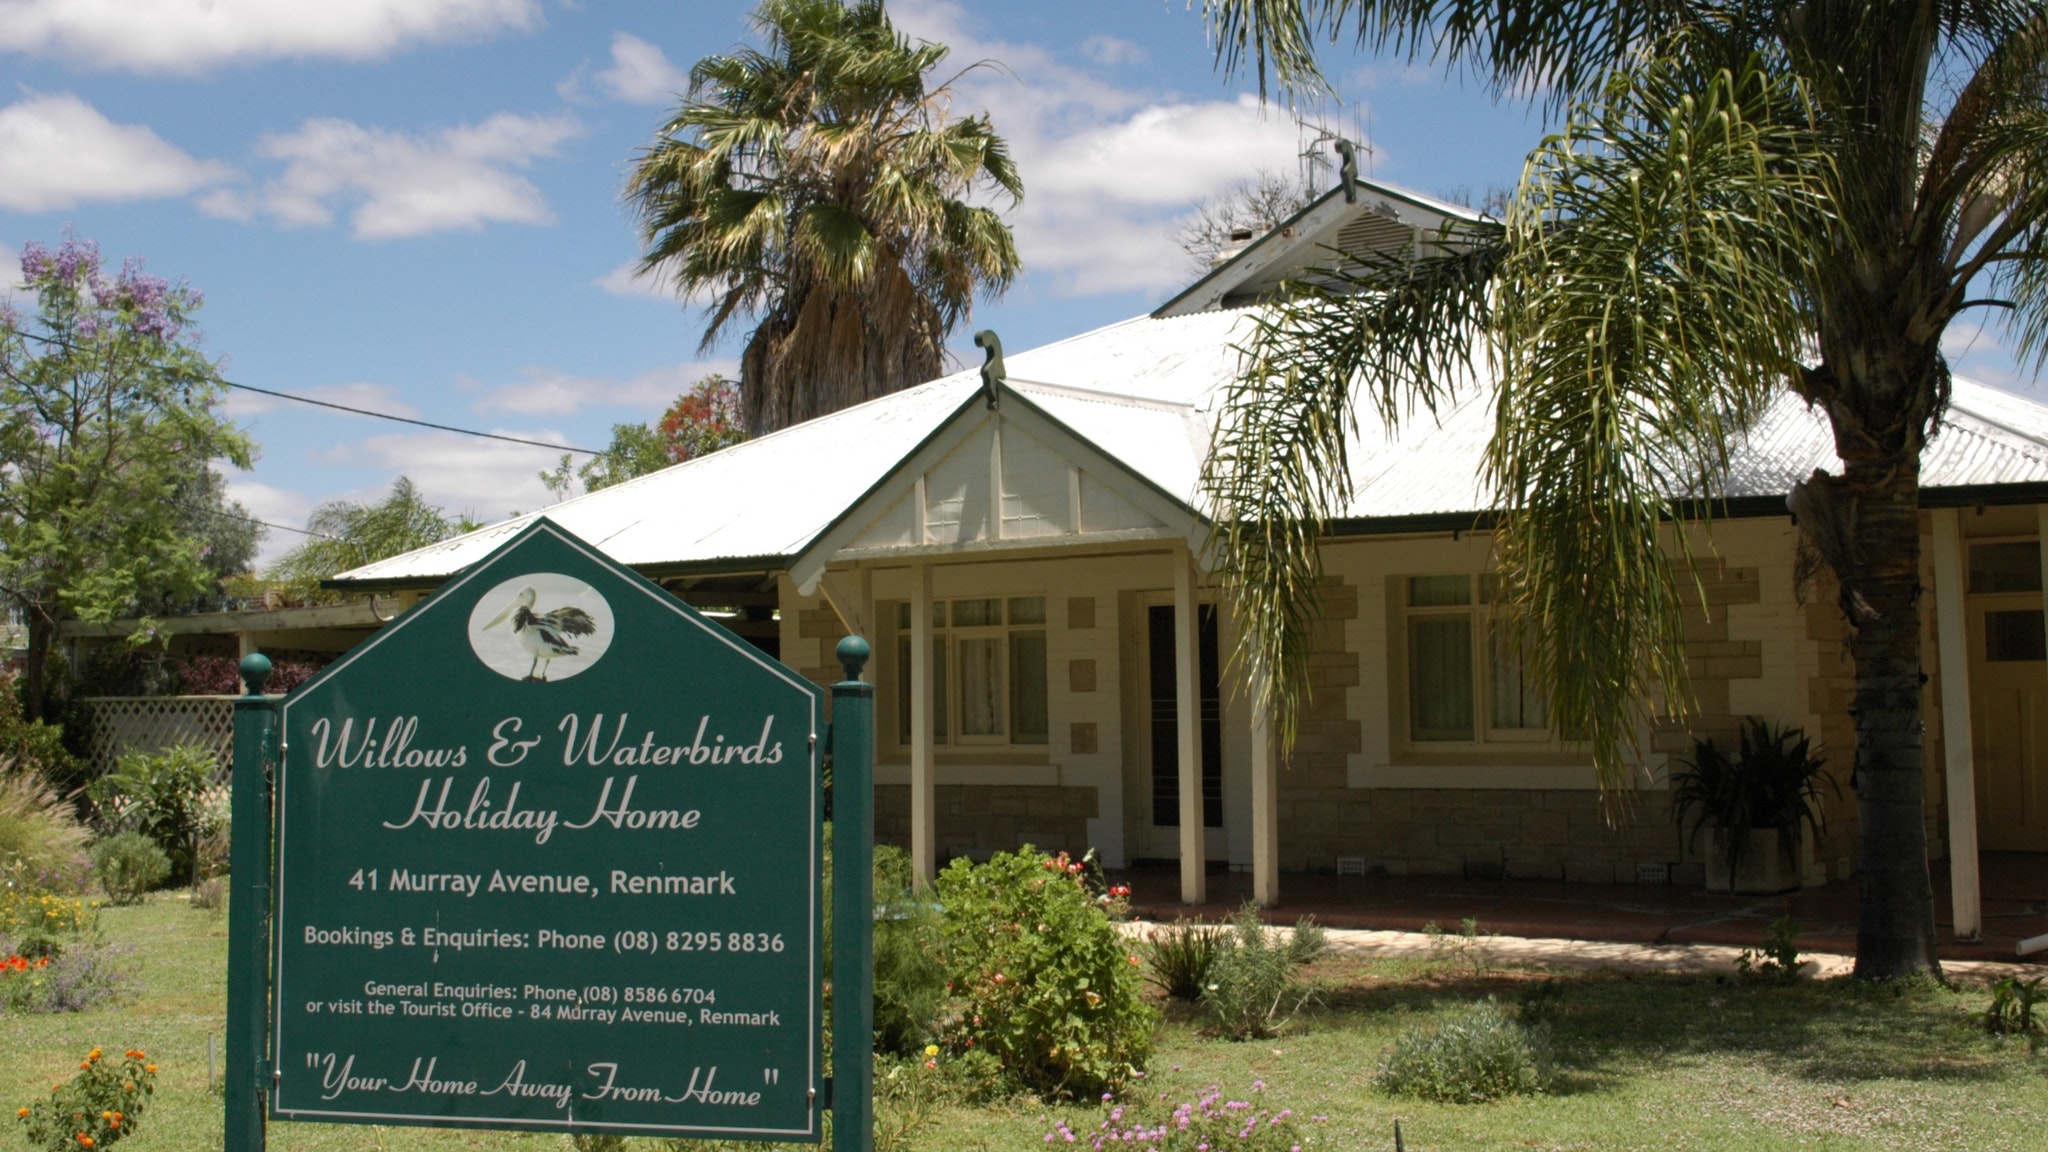 Renmark Holiday Home Willows  Waterbirds - New South Wales Tourism 